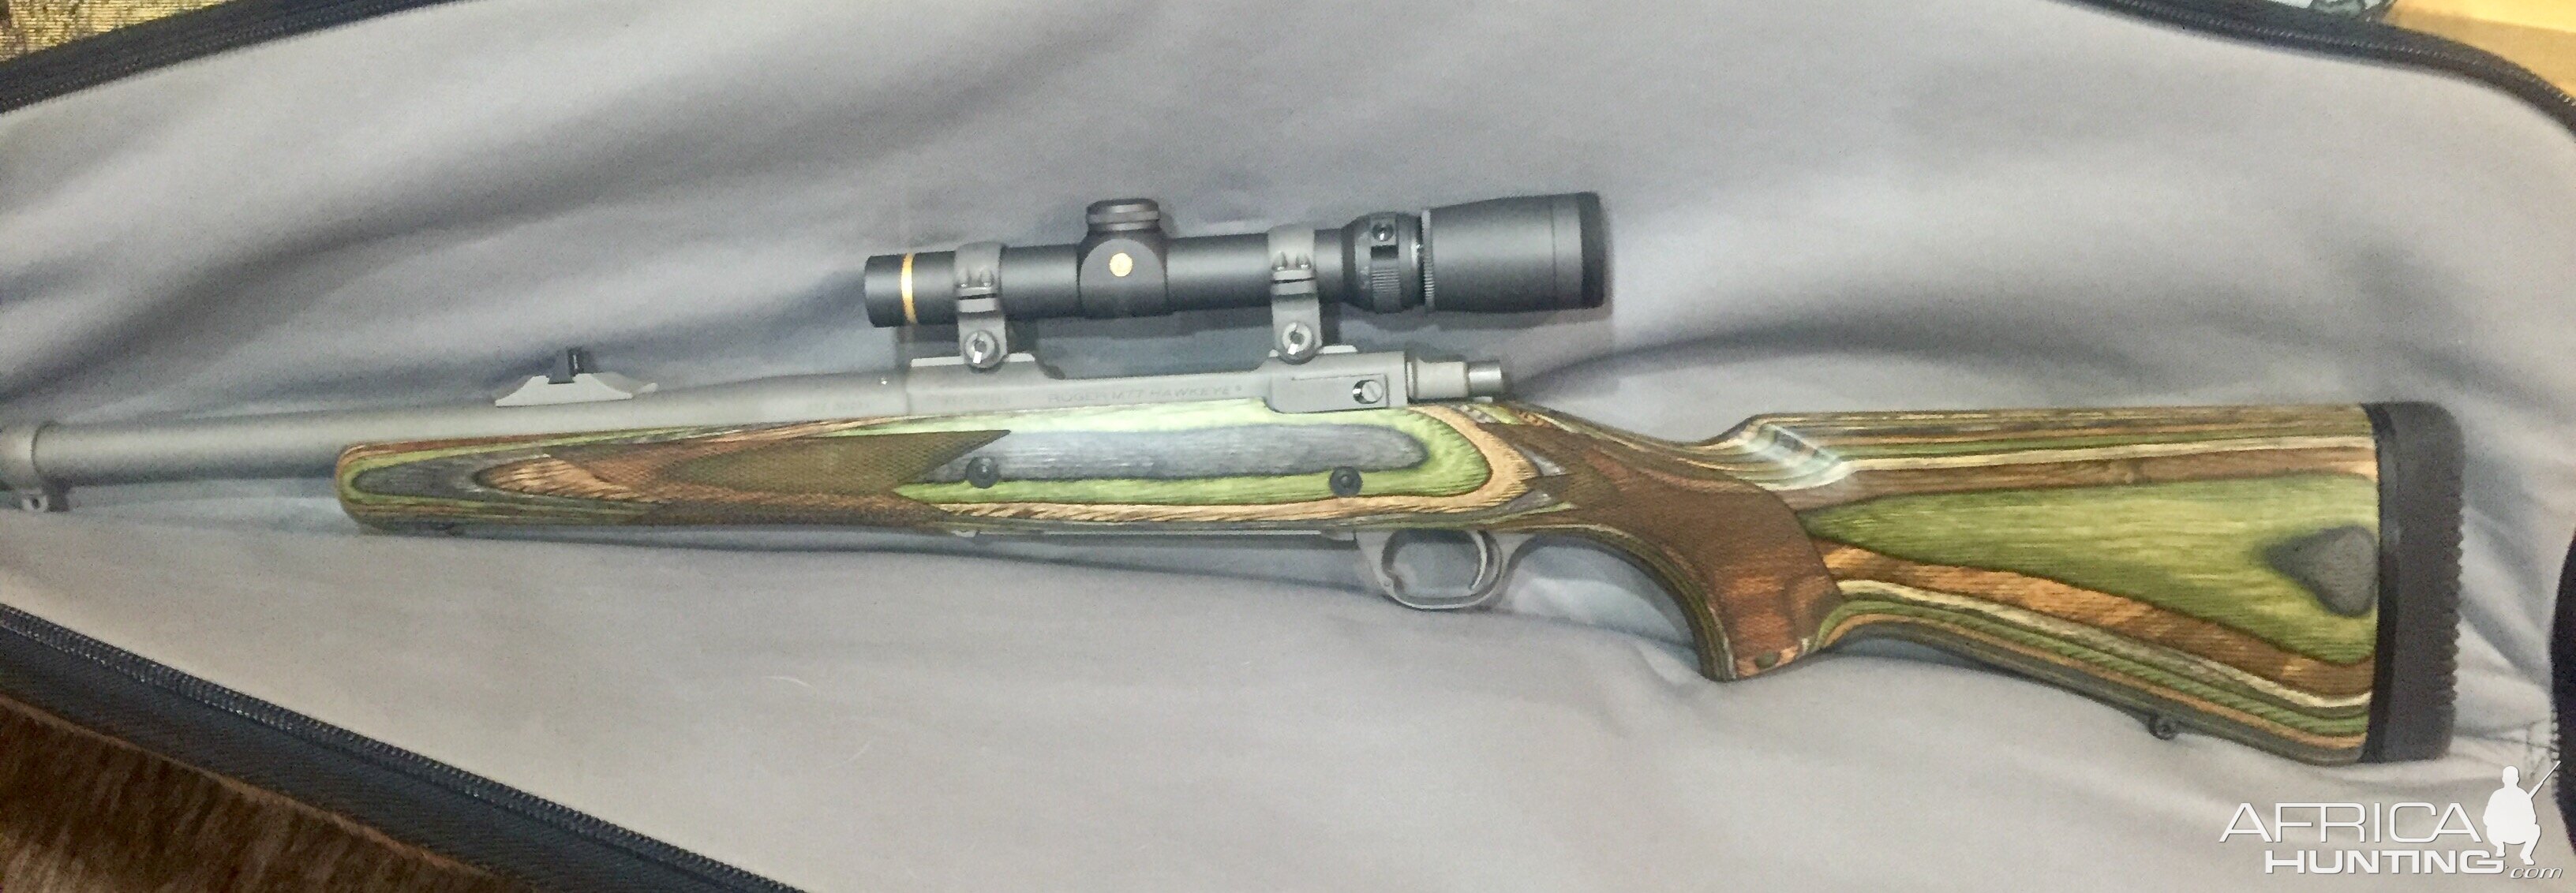 375 Ruger Rifle